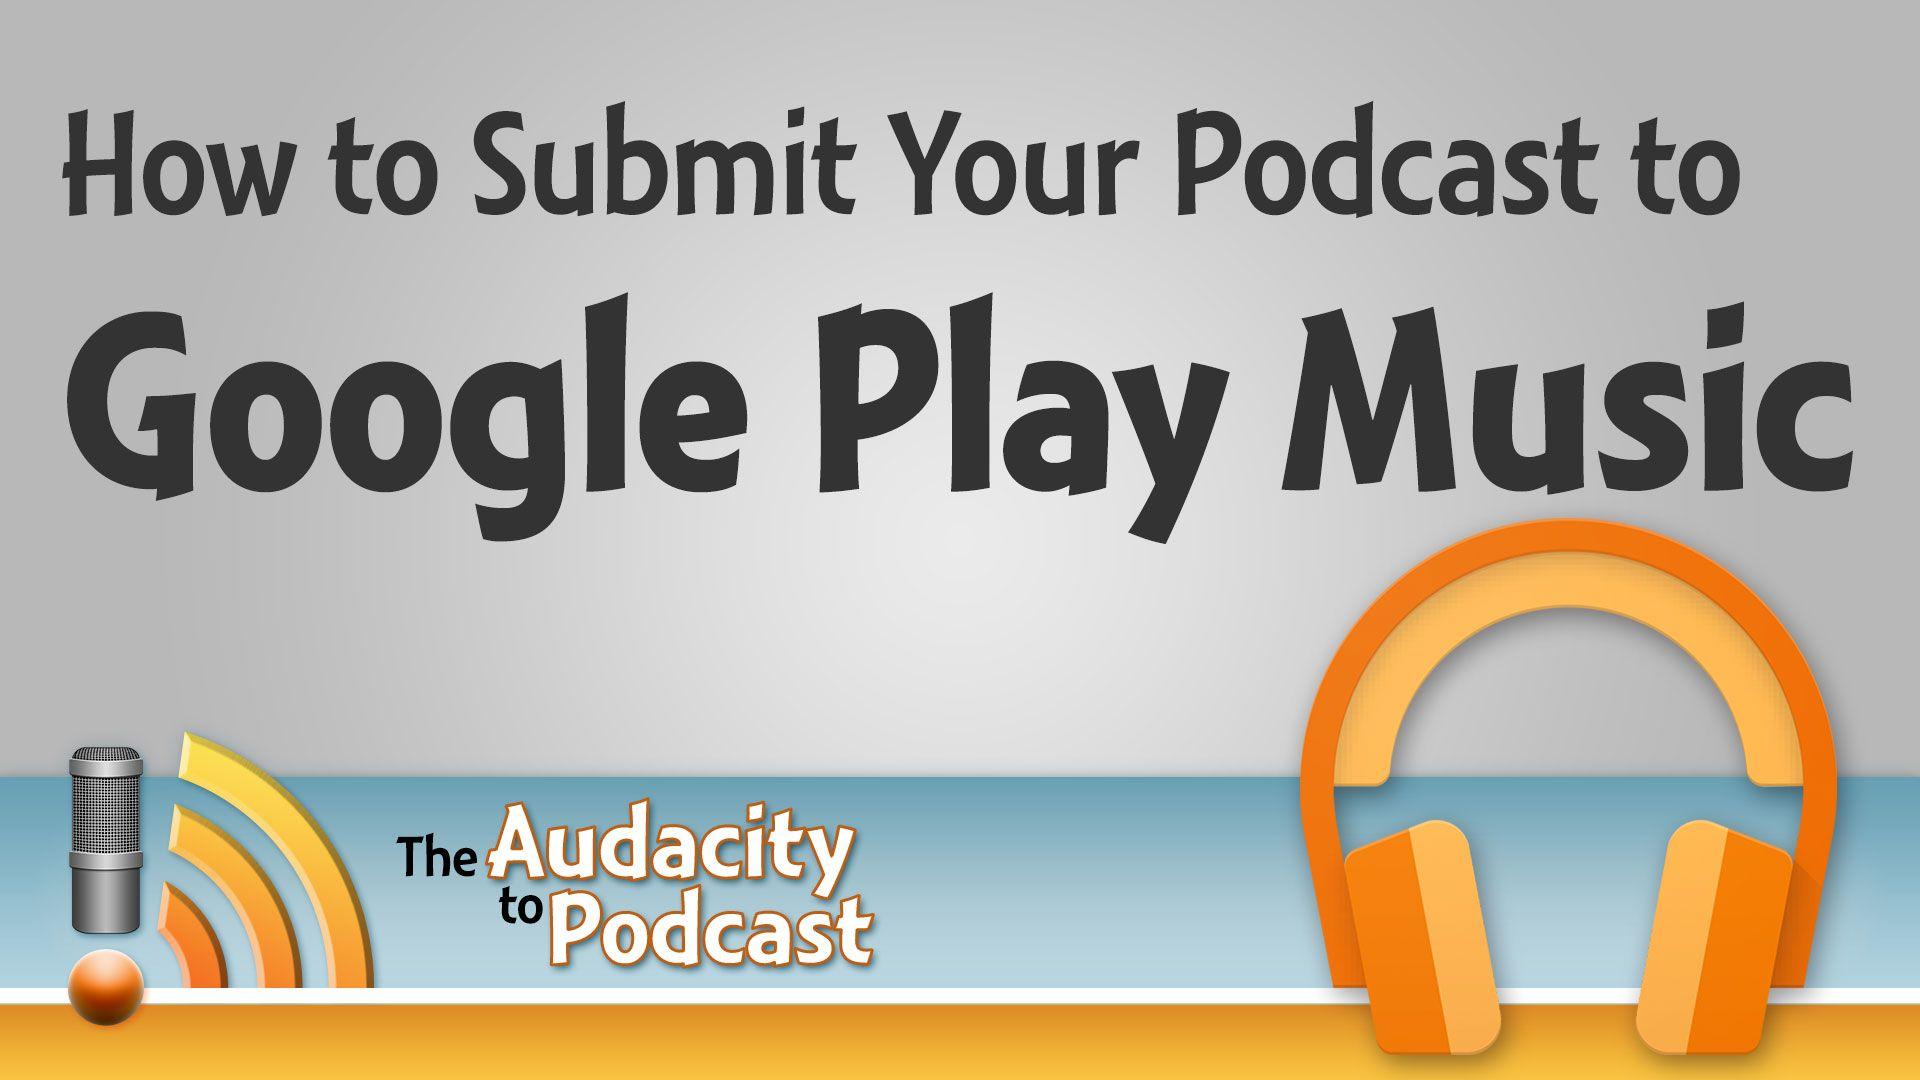 How to Submit Your Podcast to Google Play Music